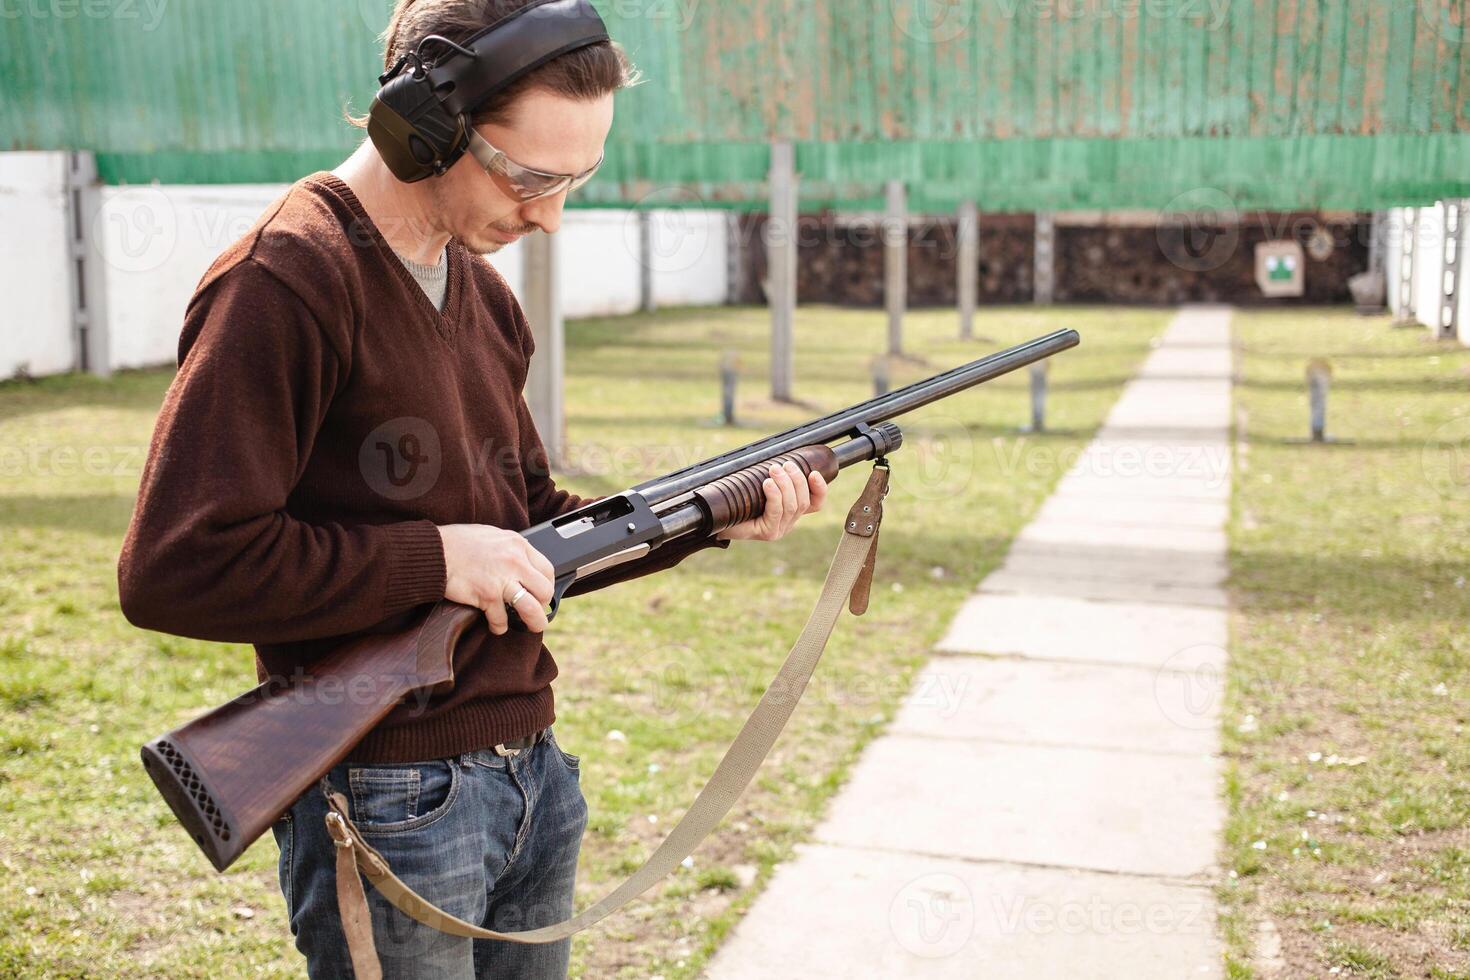 A man charges a pump-action shotgun with a Ammo. 12 caliber. Tyre outdoor. A man in headphones and goggles is preparing to shoot. Firearms for sports shooting, hobby. photo